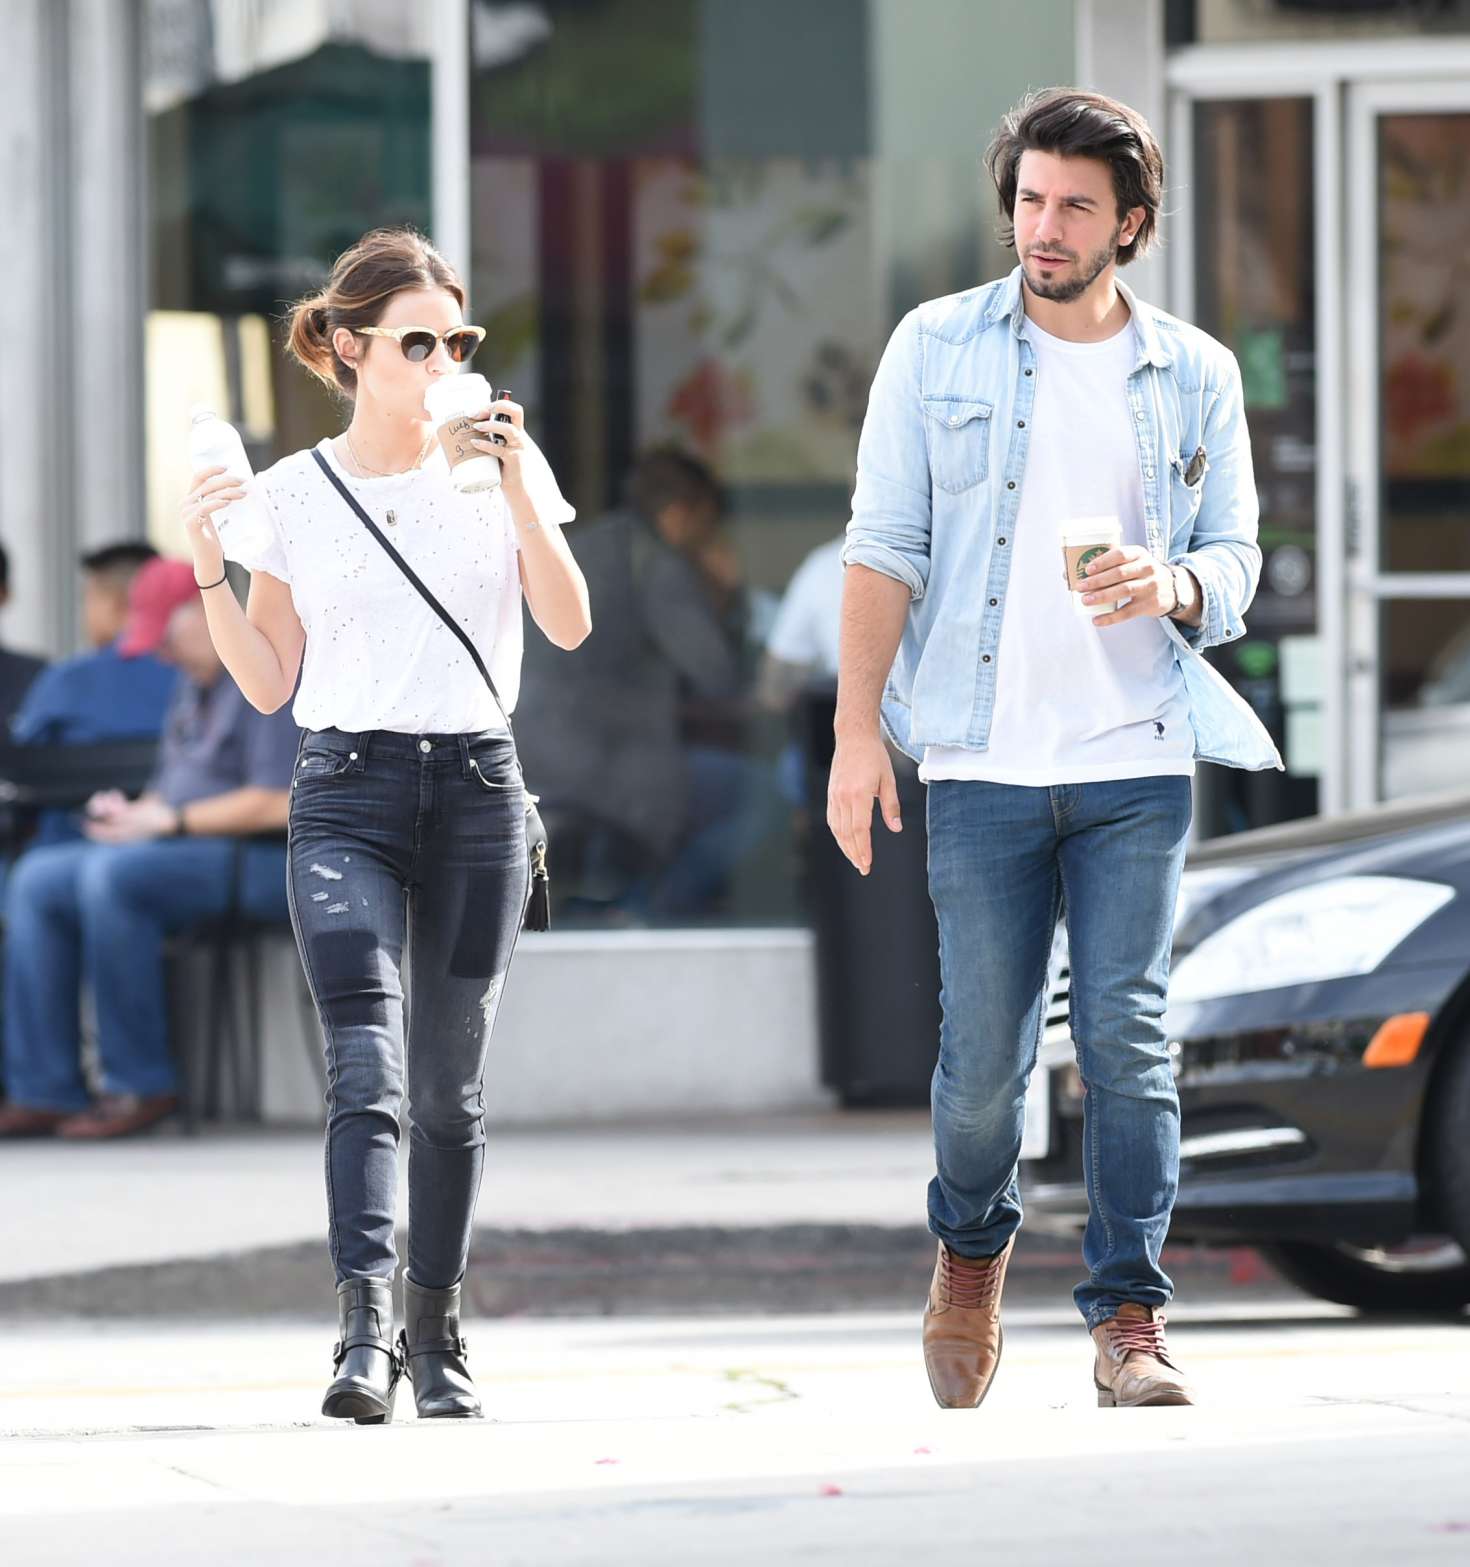 Lucy Hale and Anthony Kalabretta Gets Coffee -27 | GotCeleb